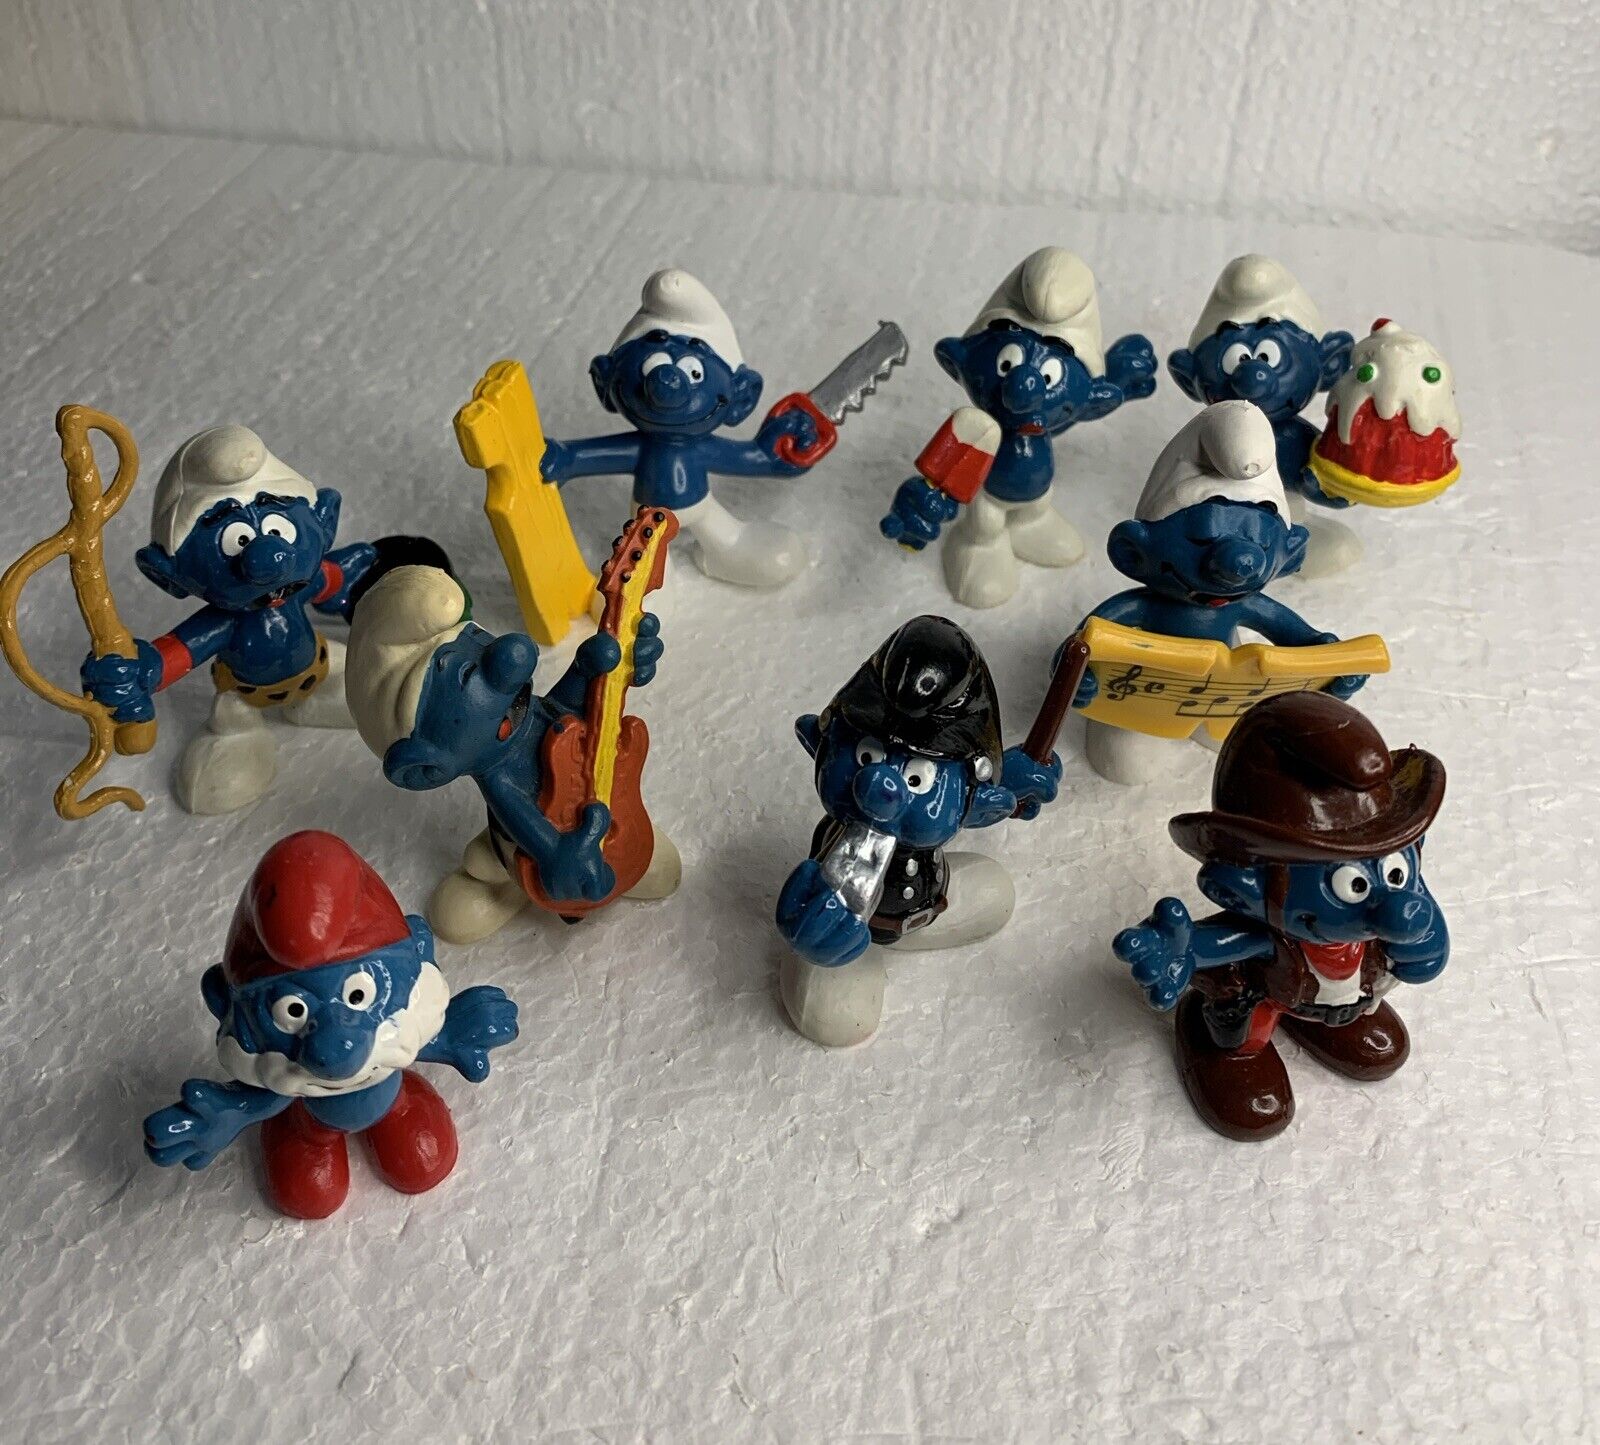 Smurfs Rare Vintage Peyo Schleich Hong Kong 1960s-1980s Lot of 9 2” Figurines